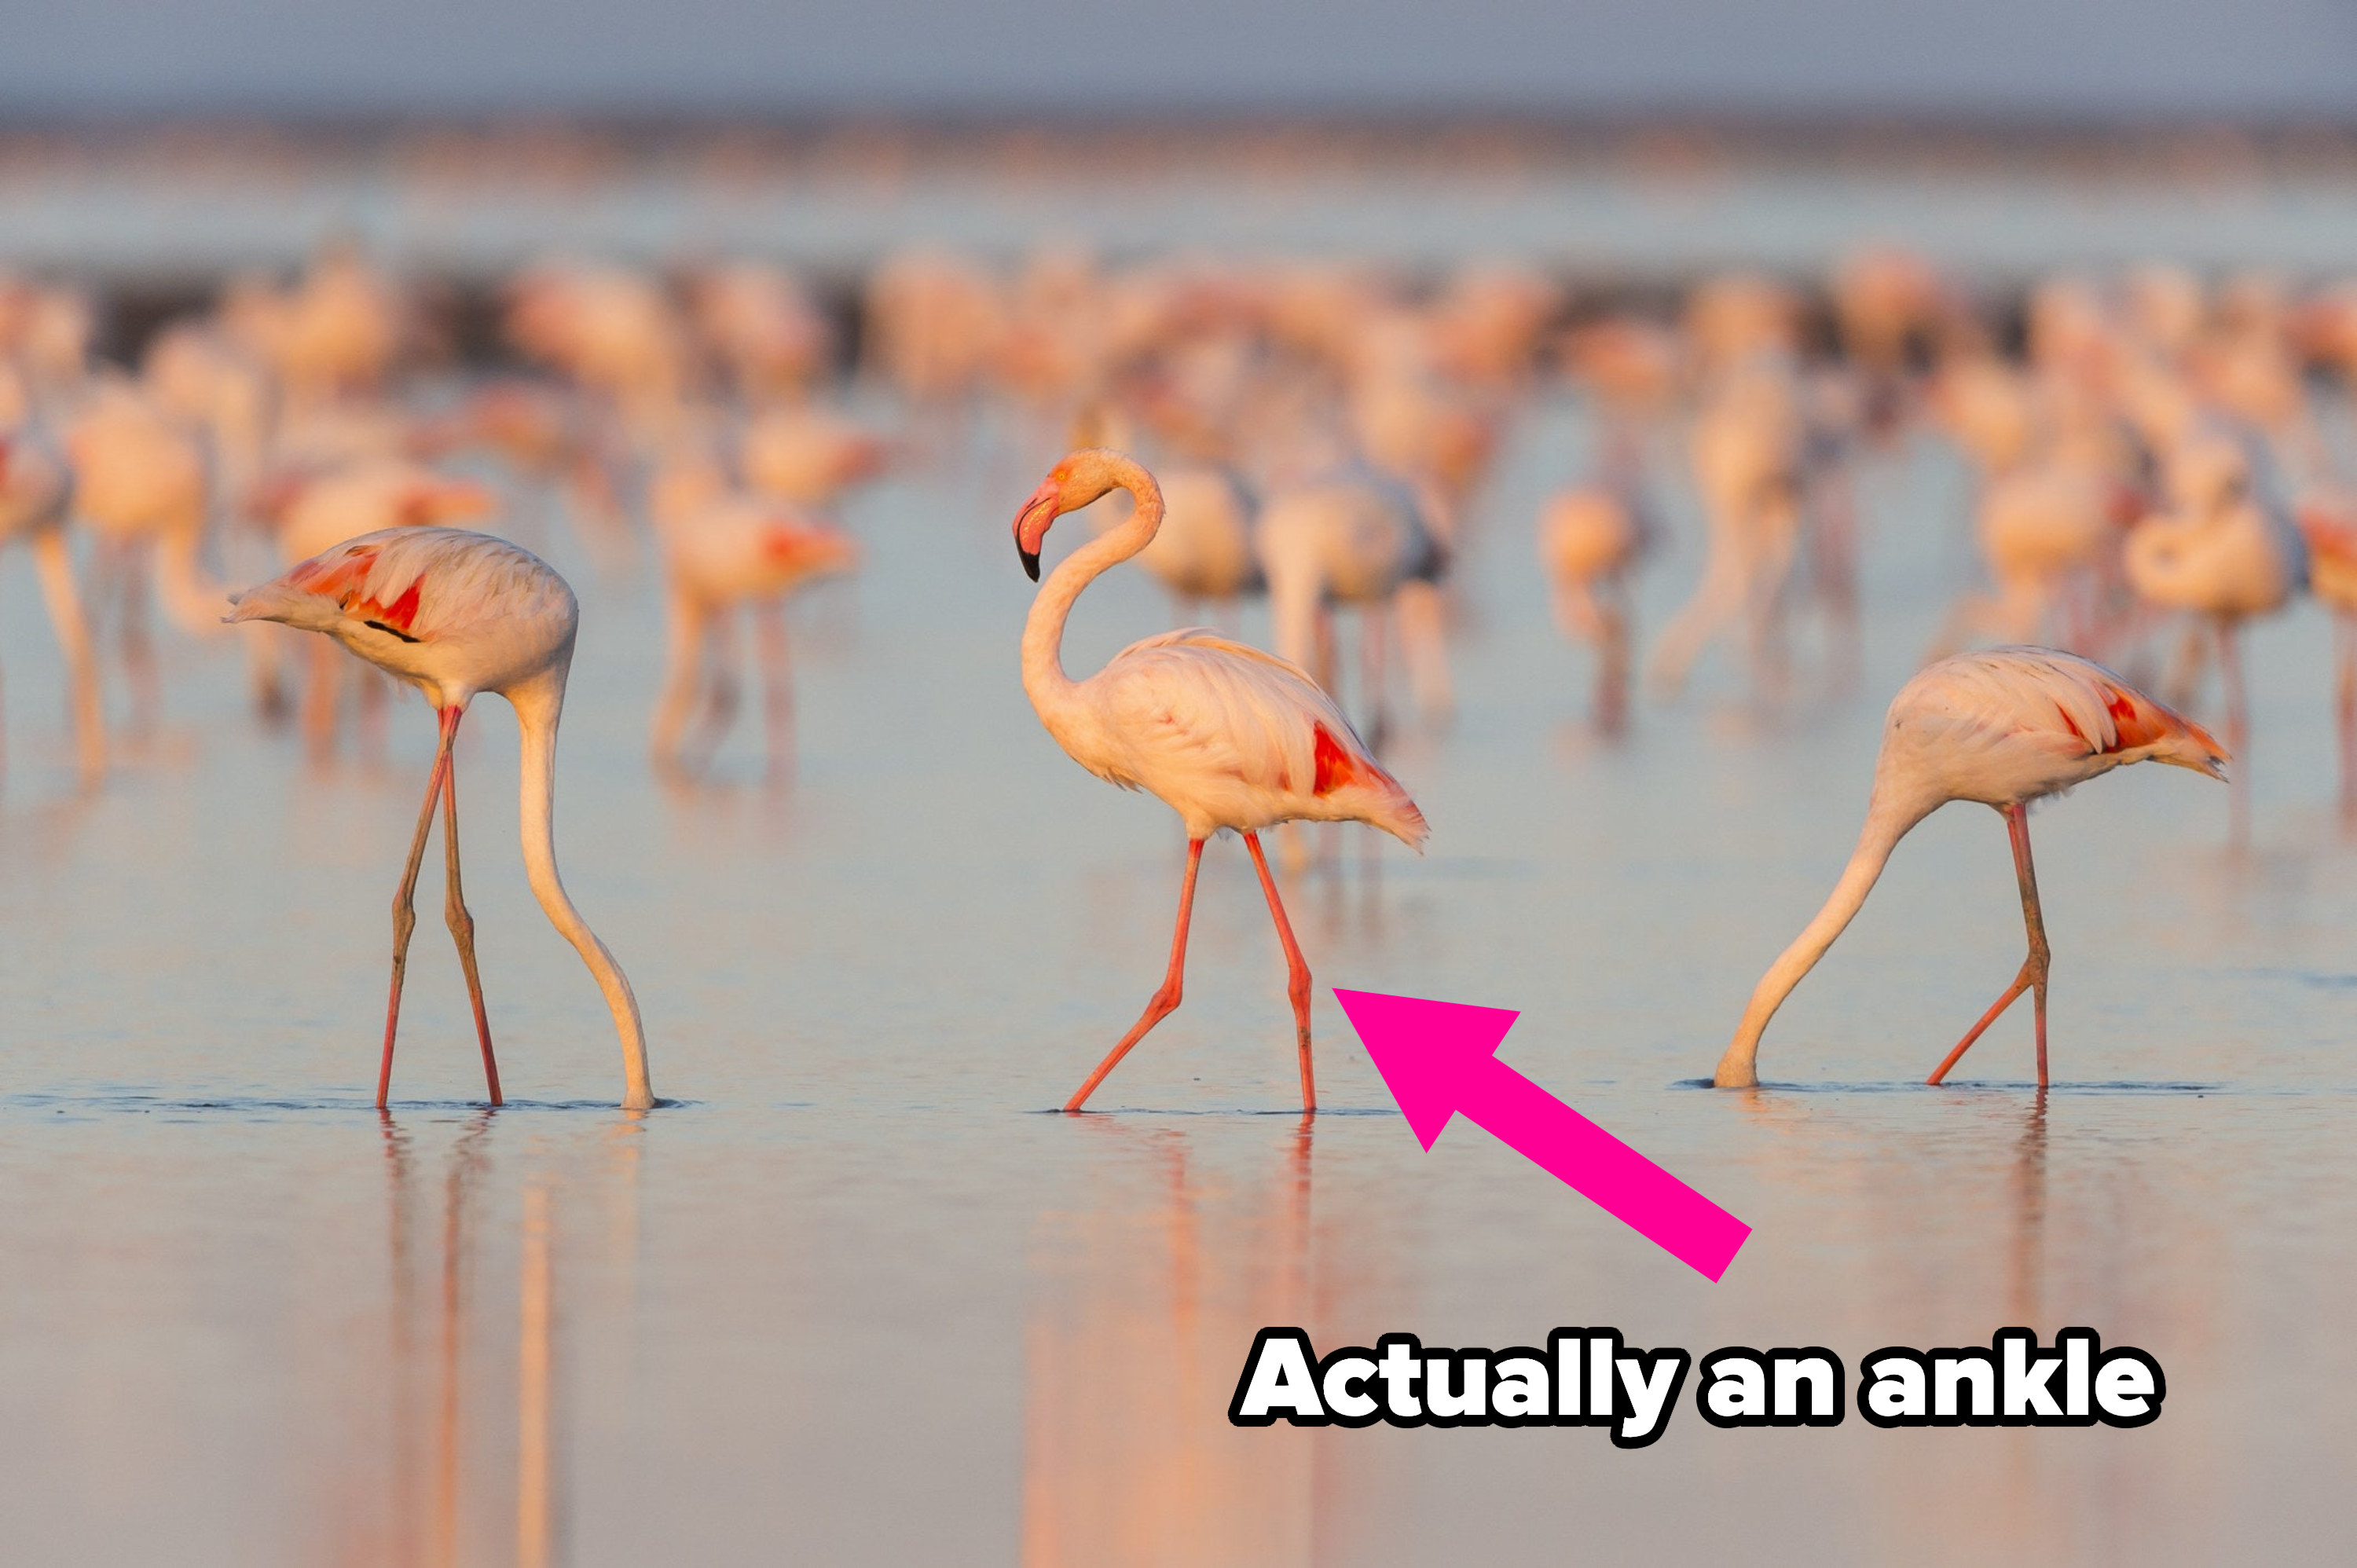 flamingos at the beach and an arrow pointing to one flamingo&#x27;s ankle